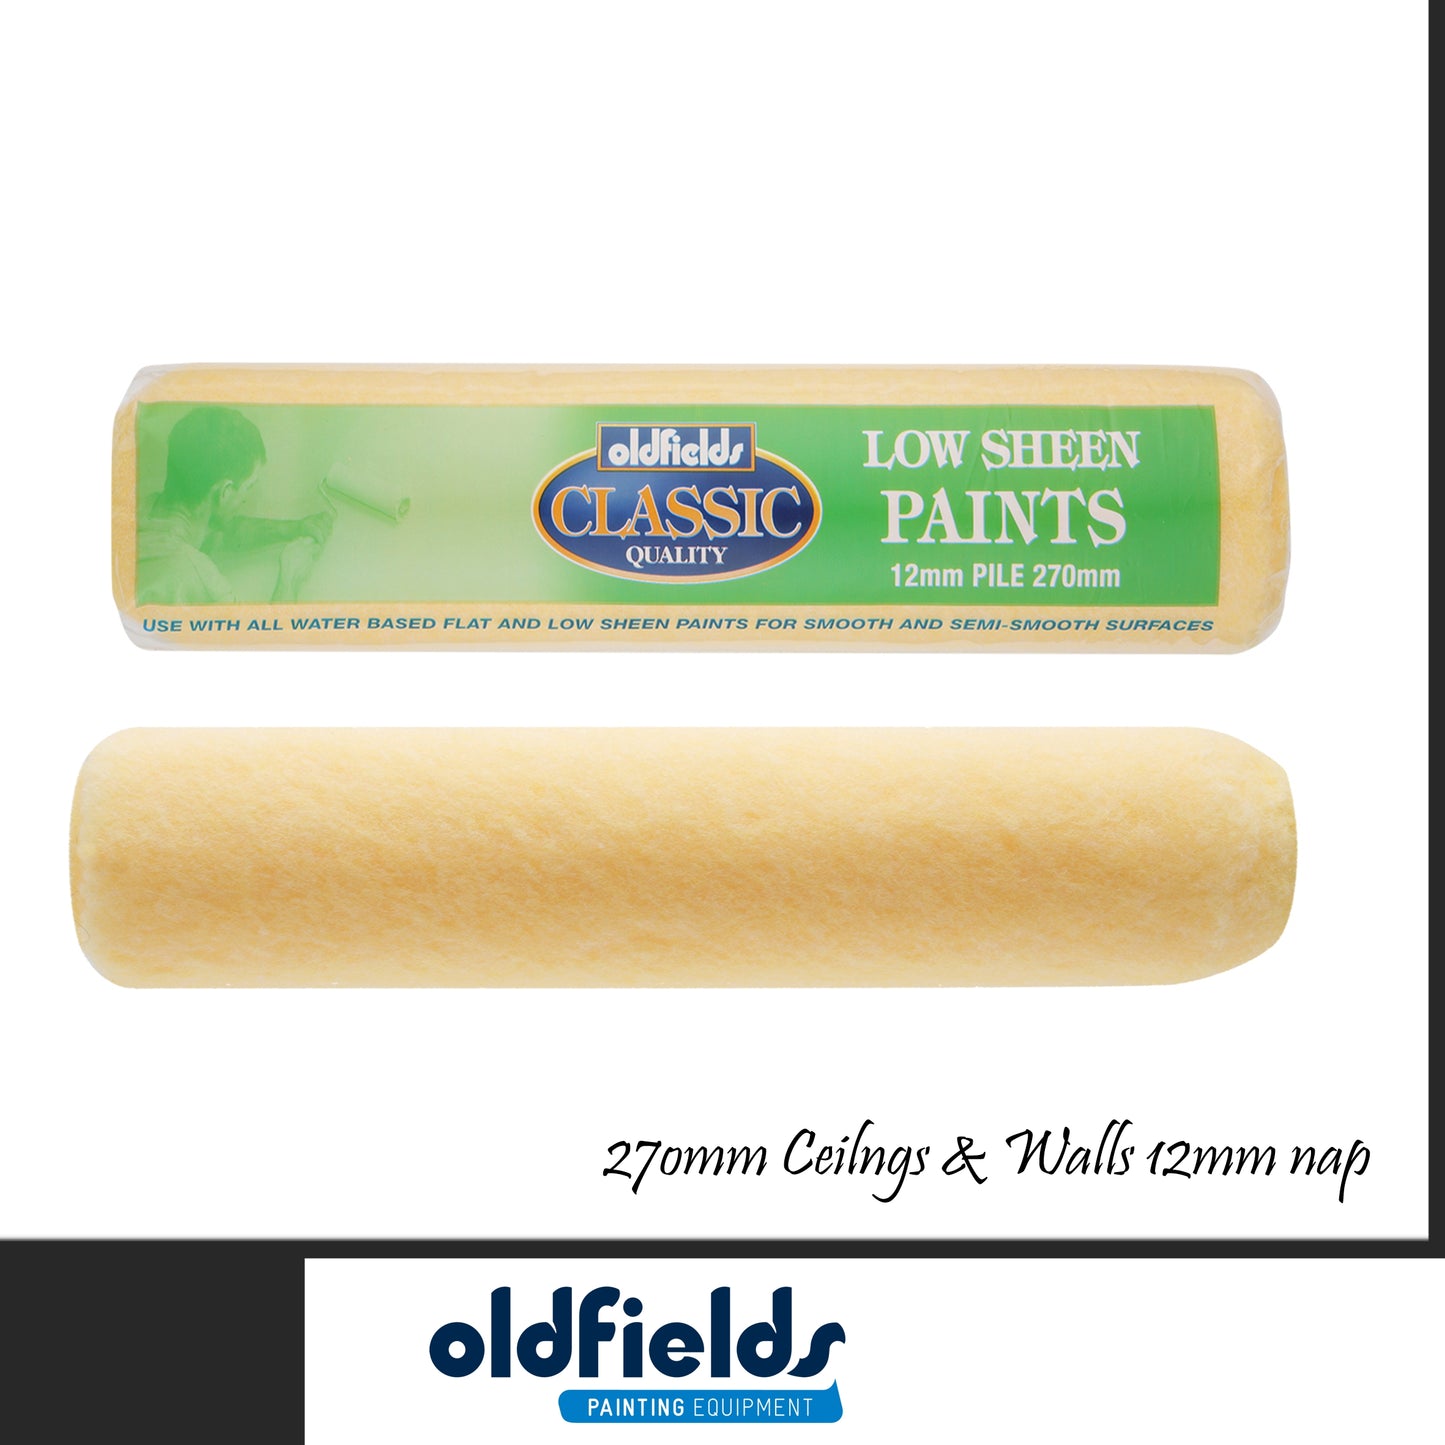 Classic Ceilings and Walls paint roller sleeves -12mm nap (230mm & 270mm) from Oldfields - Da Vinci Chalk Paint & Rustic home decor